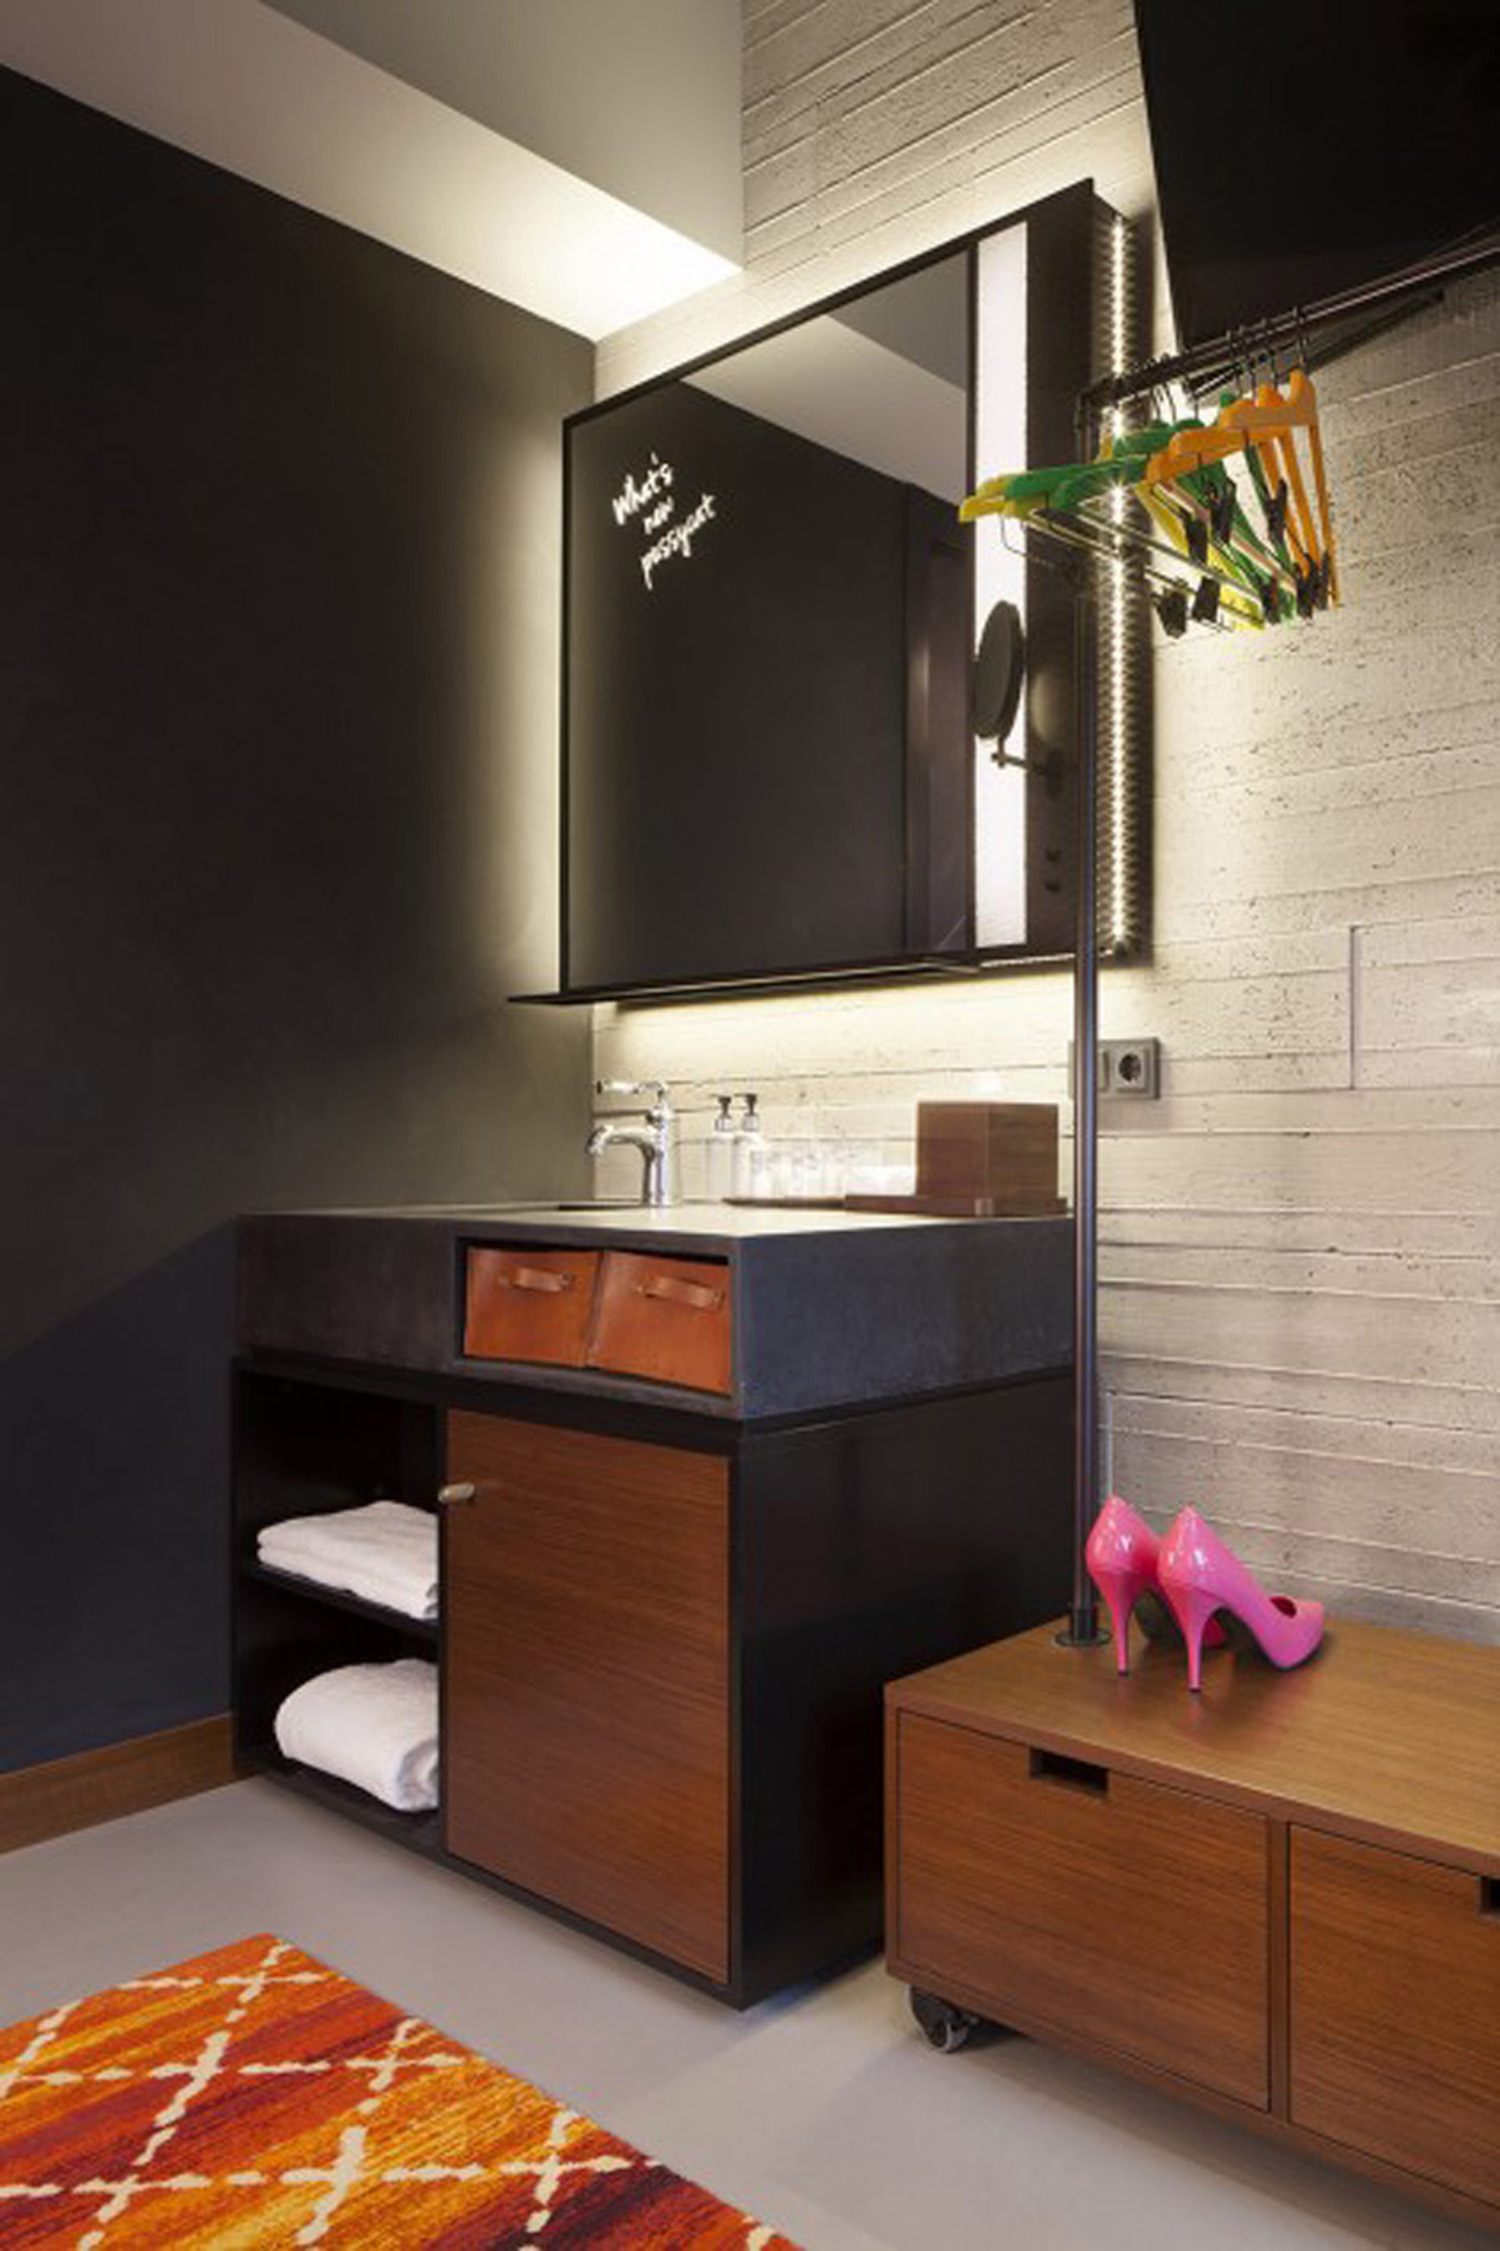 unified furniture design of room and bathroom